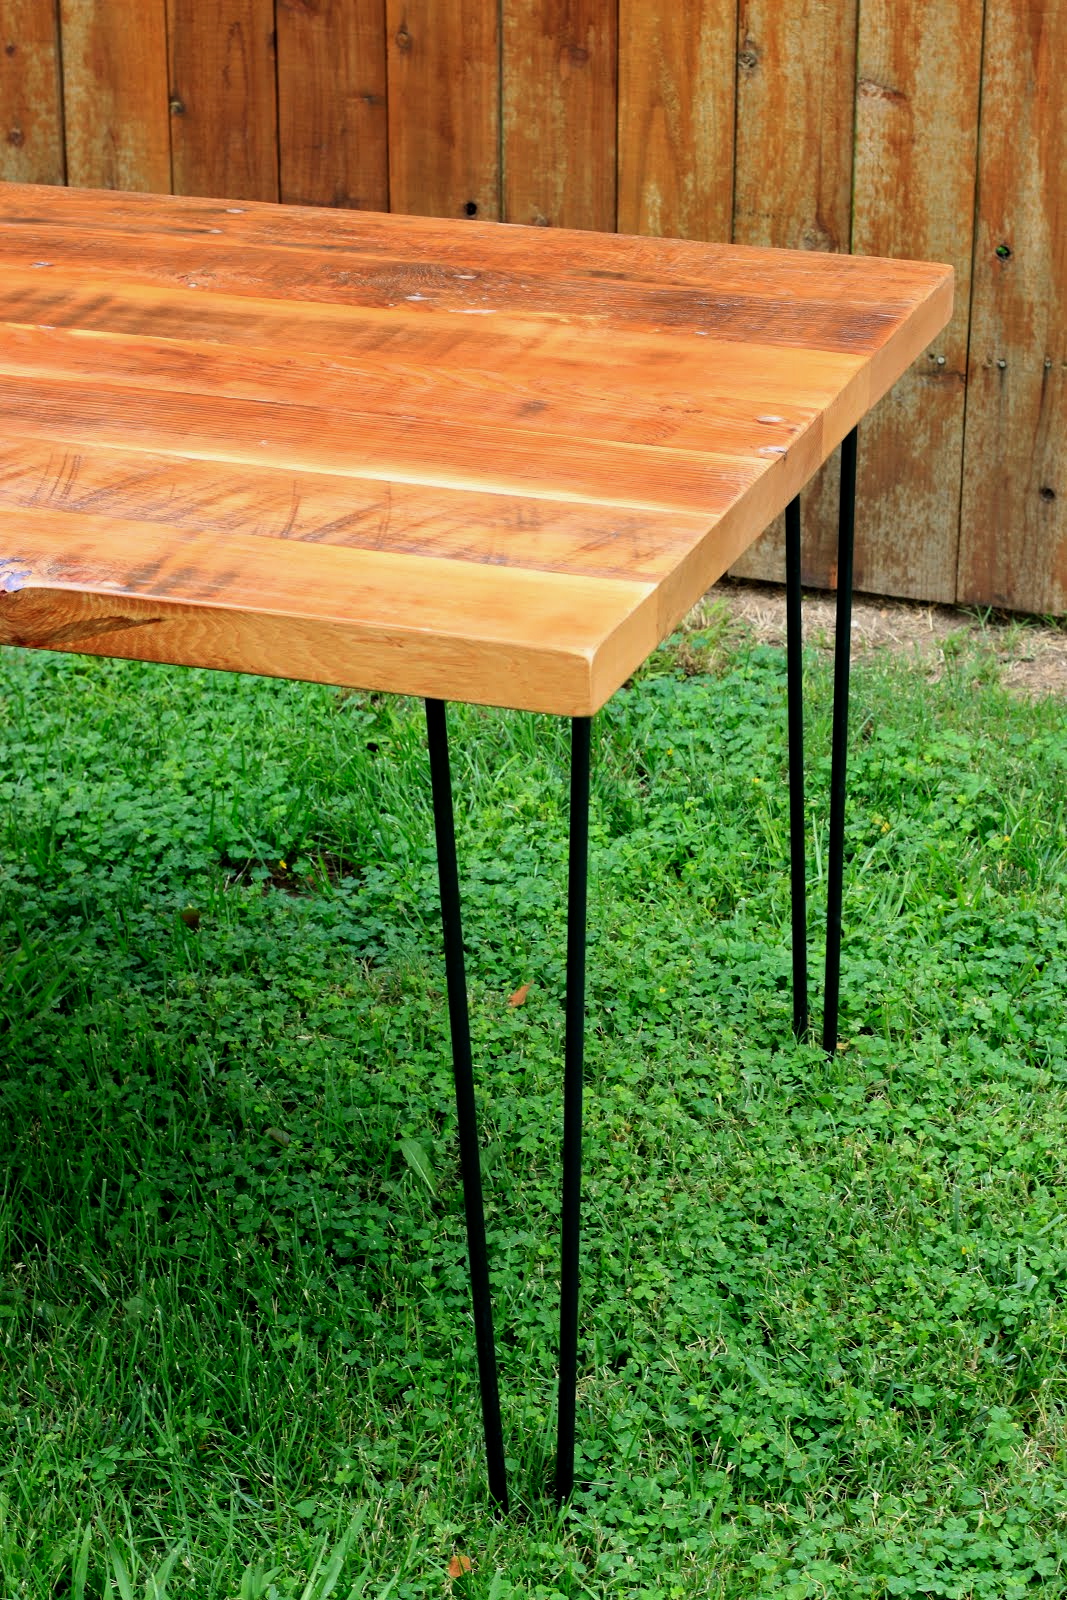 Arbor Exchange | Reclaimed Wood Furniture: Outdoor Dining Table with